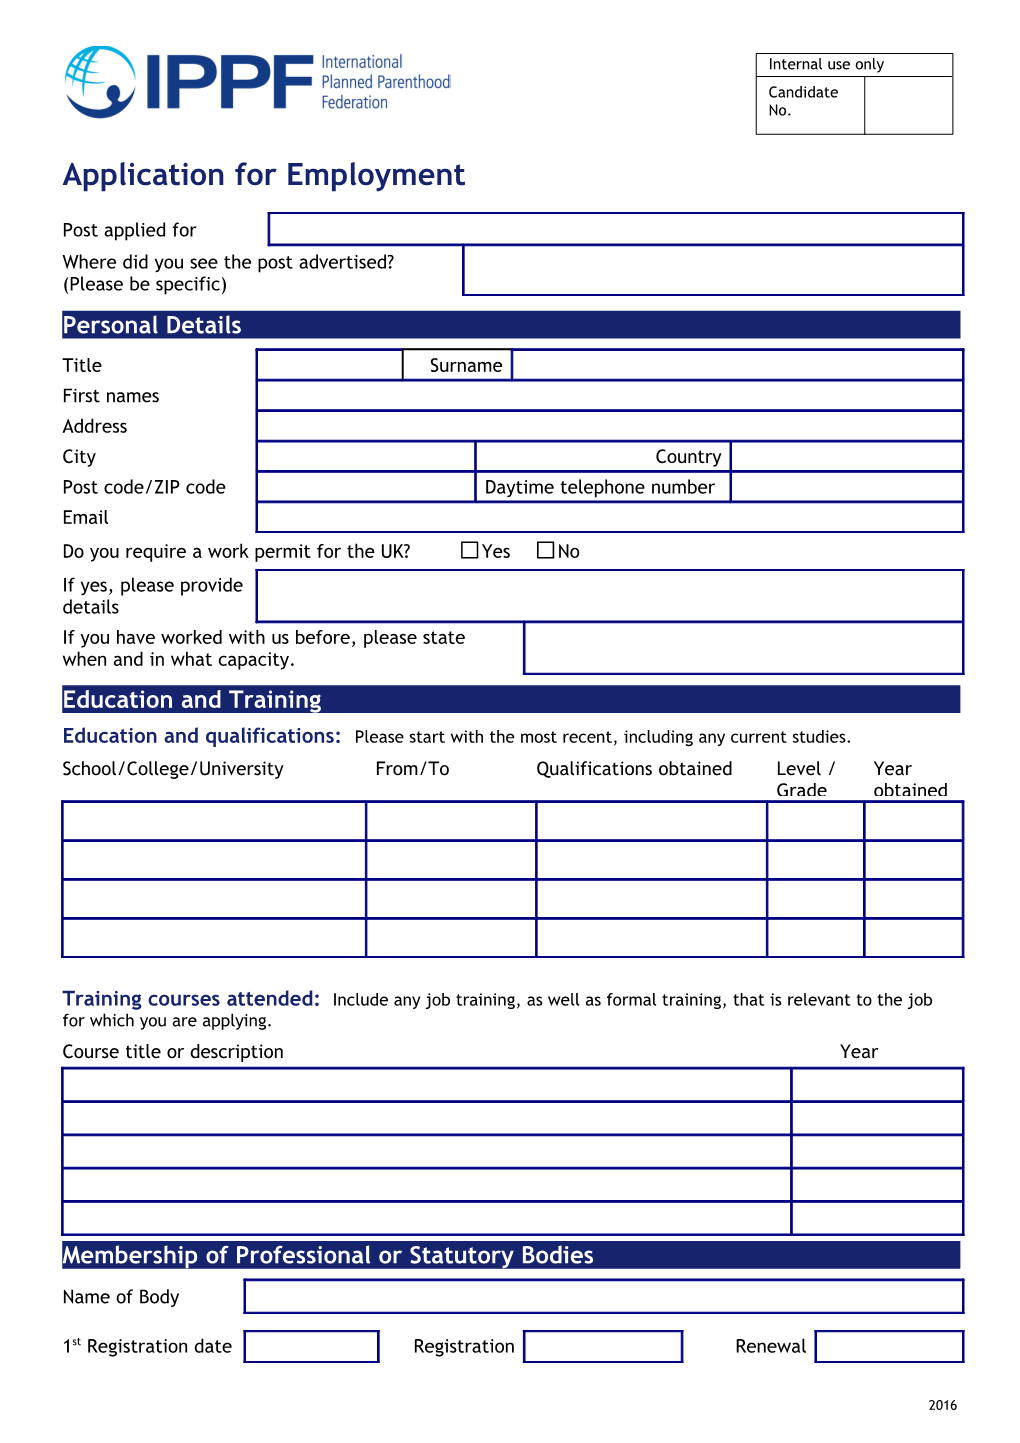 Application for Employment s193